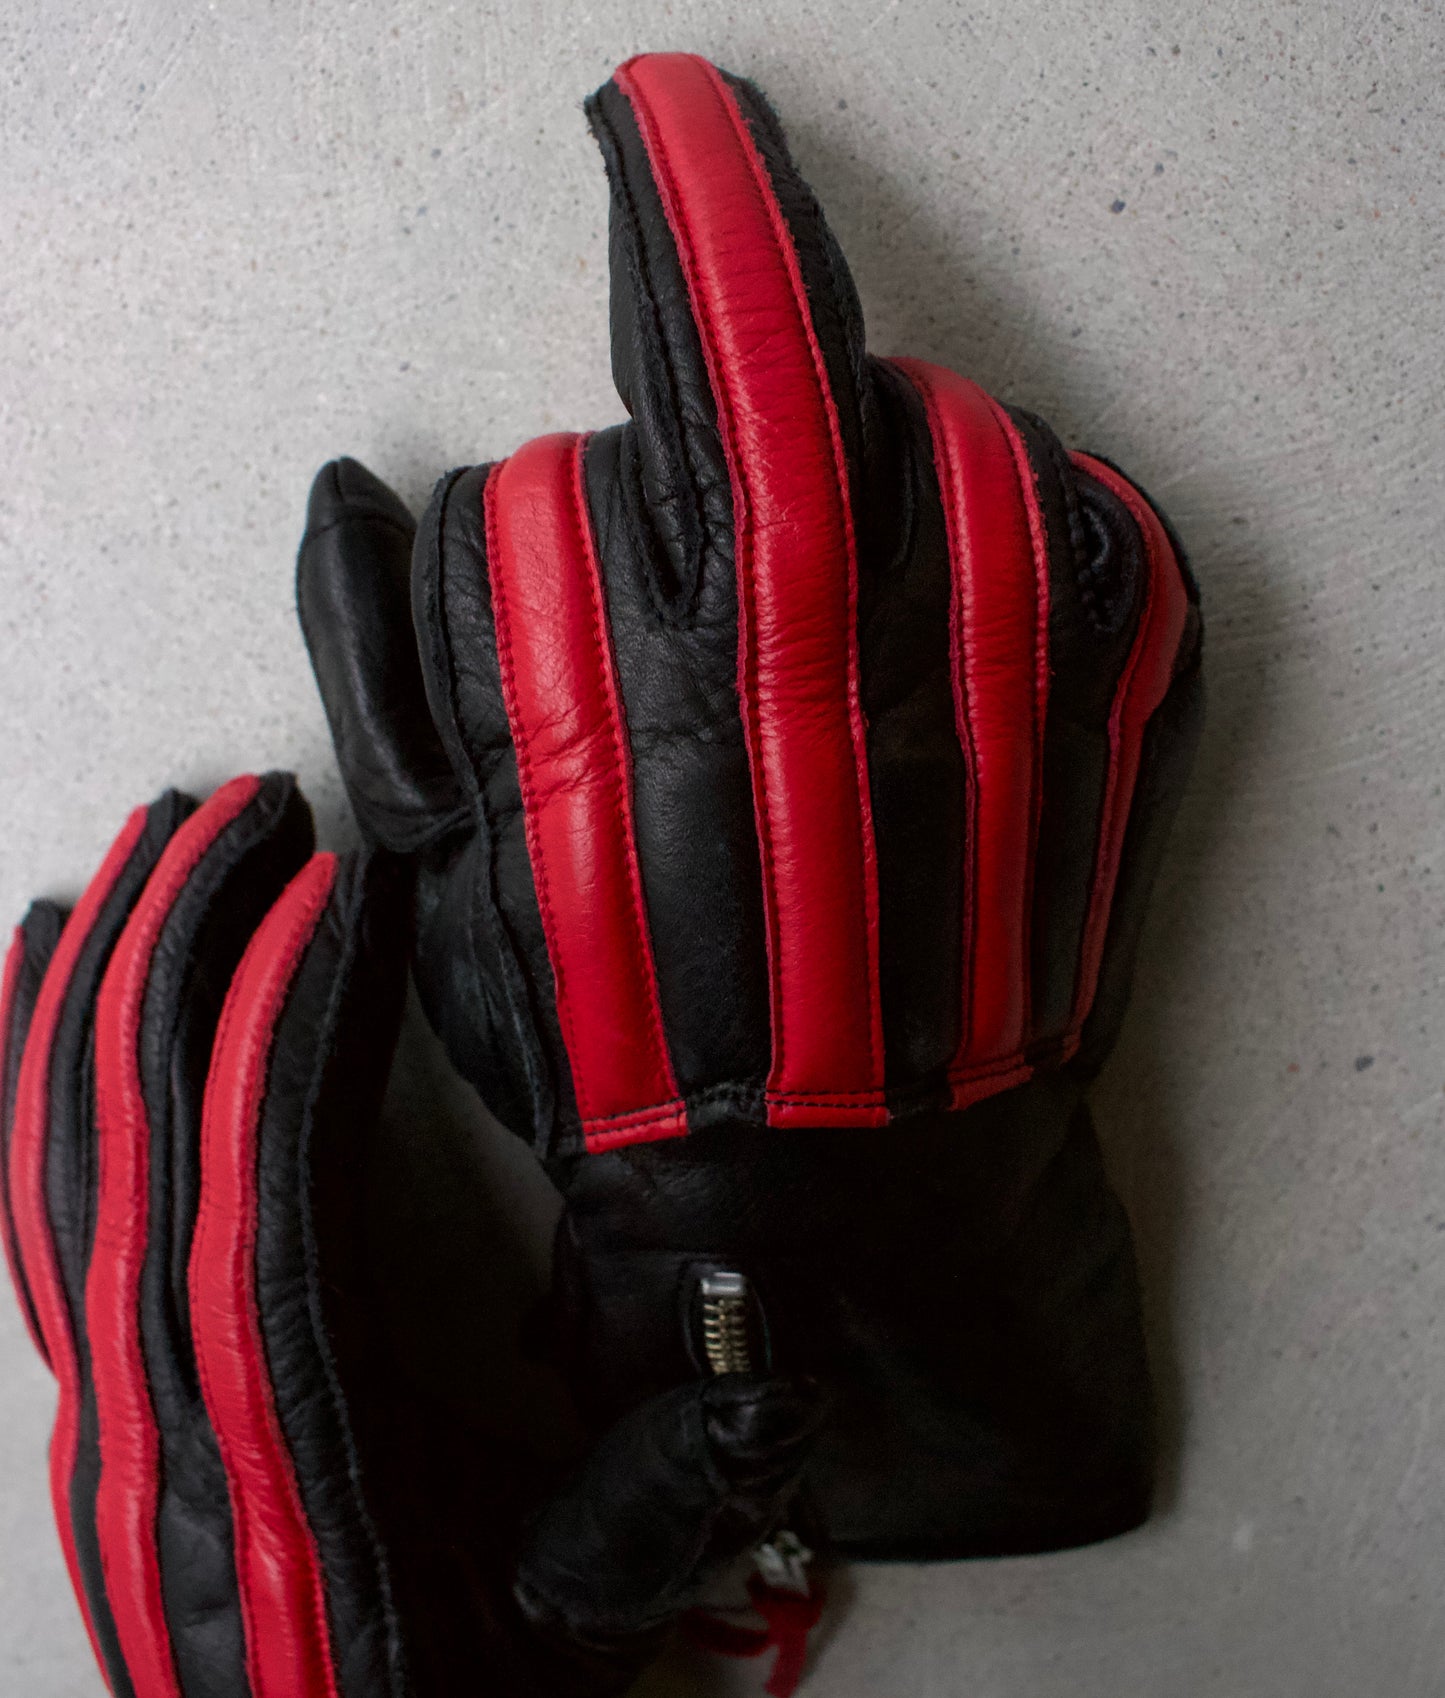 KADOYA Early 00s BHR-SPEED 1 Black/Red Stripes Leather Motorcycle Gloves